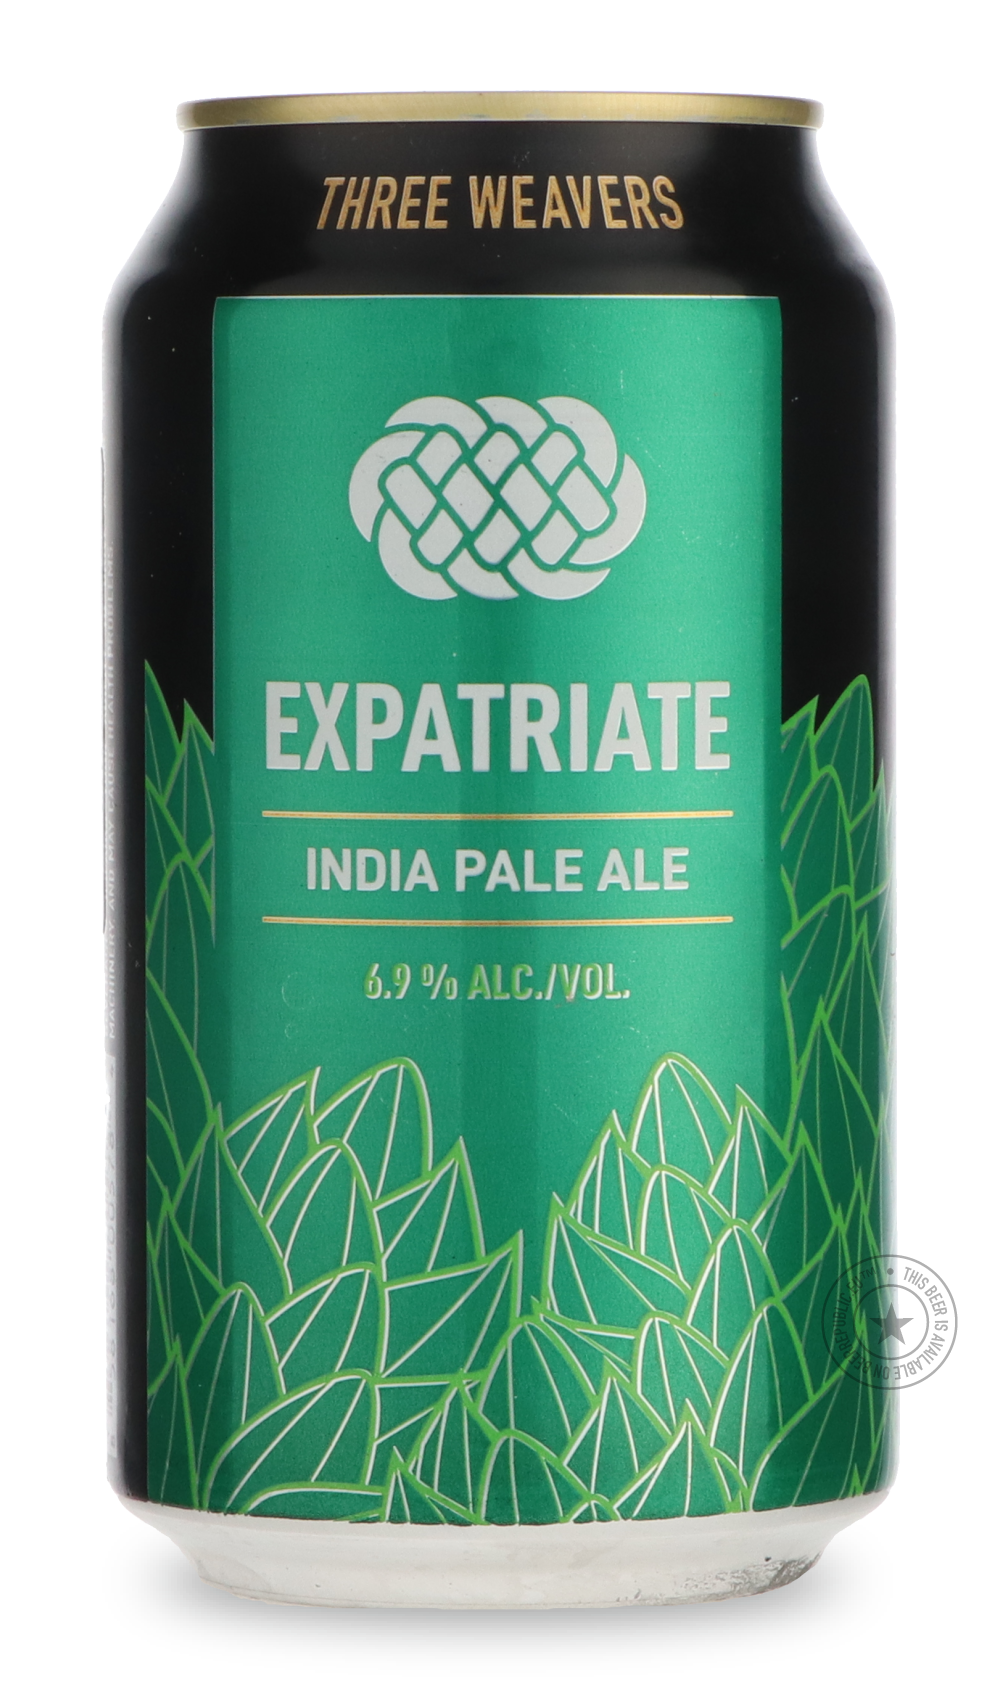 -Three Weavers- Expatriate-IPA- Only @ Beer Republic - The best online beer store for American & Canadian craft beer - Buy beer online from the USA and Canada - Bier online kopen - Amerikaans bier kopen - Craft beer store - Craft beer kopen - Amerikanisch bier kaufen - Bier online kaufen - Acheter biere online - IPA - Stout - Porter - New England IPA - Hazy IPA - Imperial Stout - Barrel Aged - Barrel Aged Imperial Stout - Brown - Dark beer - Blond - Blonde - Pilsner - Lager - Wheat - Weizen - Amber - Barley